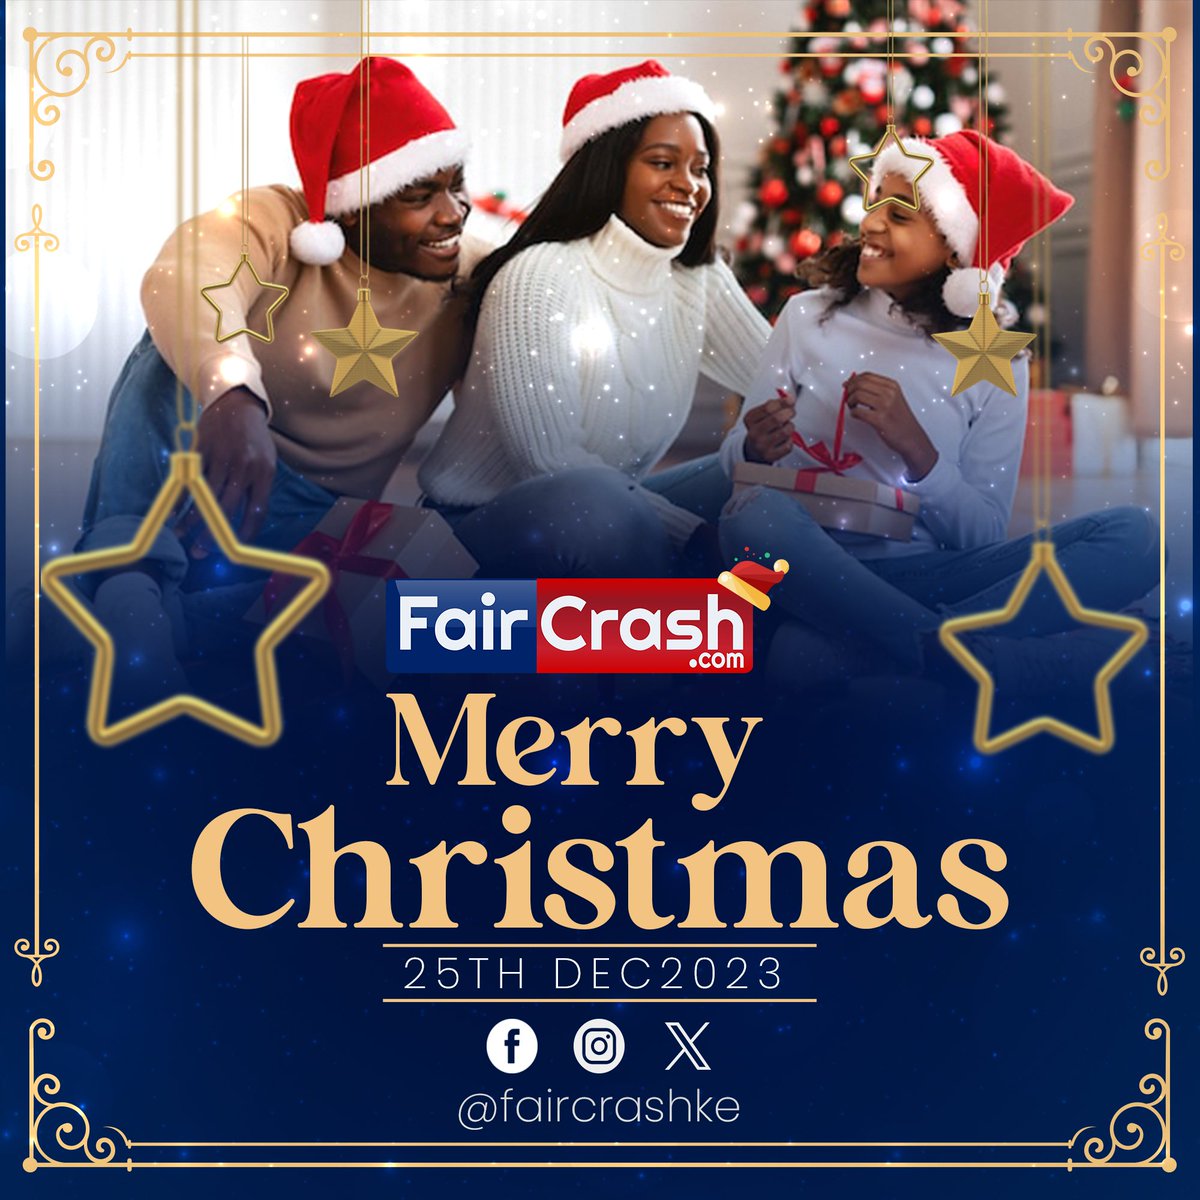 Wishing you all a Merry Christmas! May this day be filled with joy, peace and cherished moments with loved ones. Thank you for being a part of the Fair Crash family!  #MerryChristmas #CheersToYou 🥂